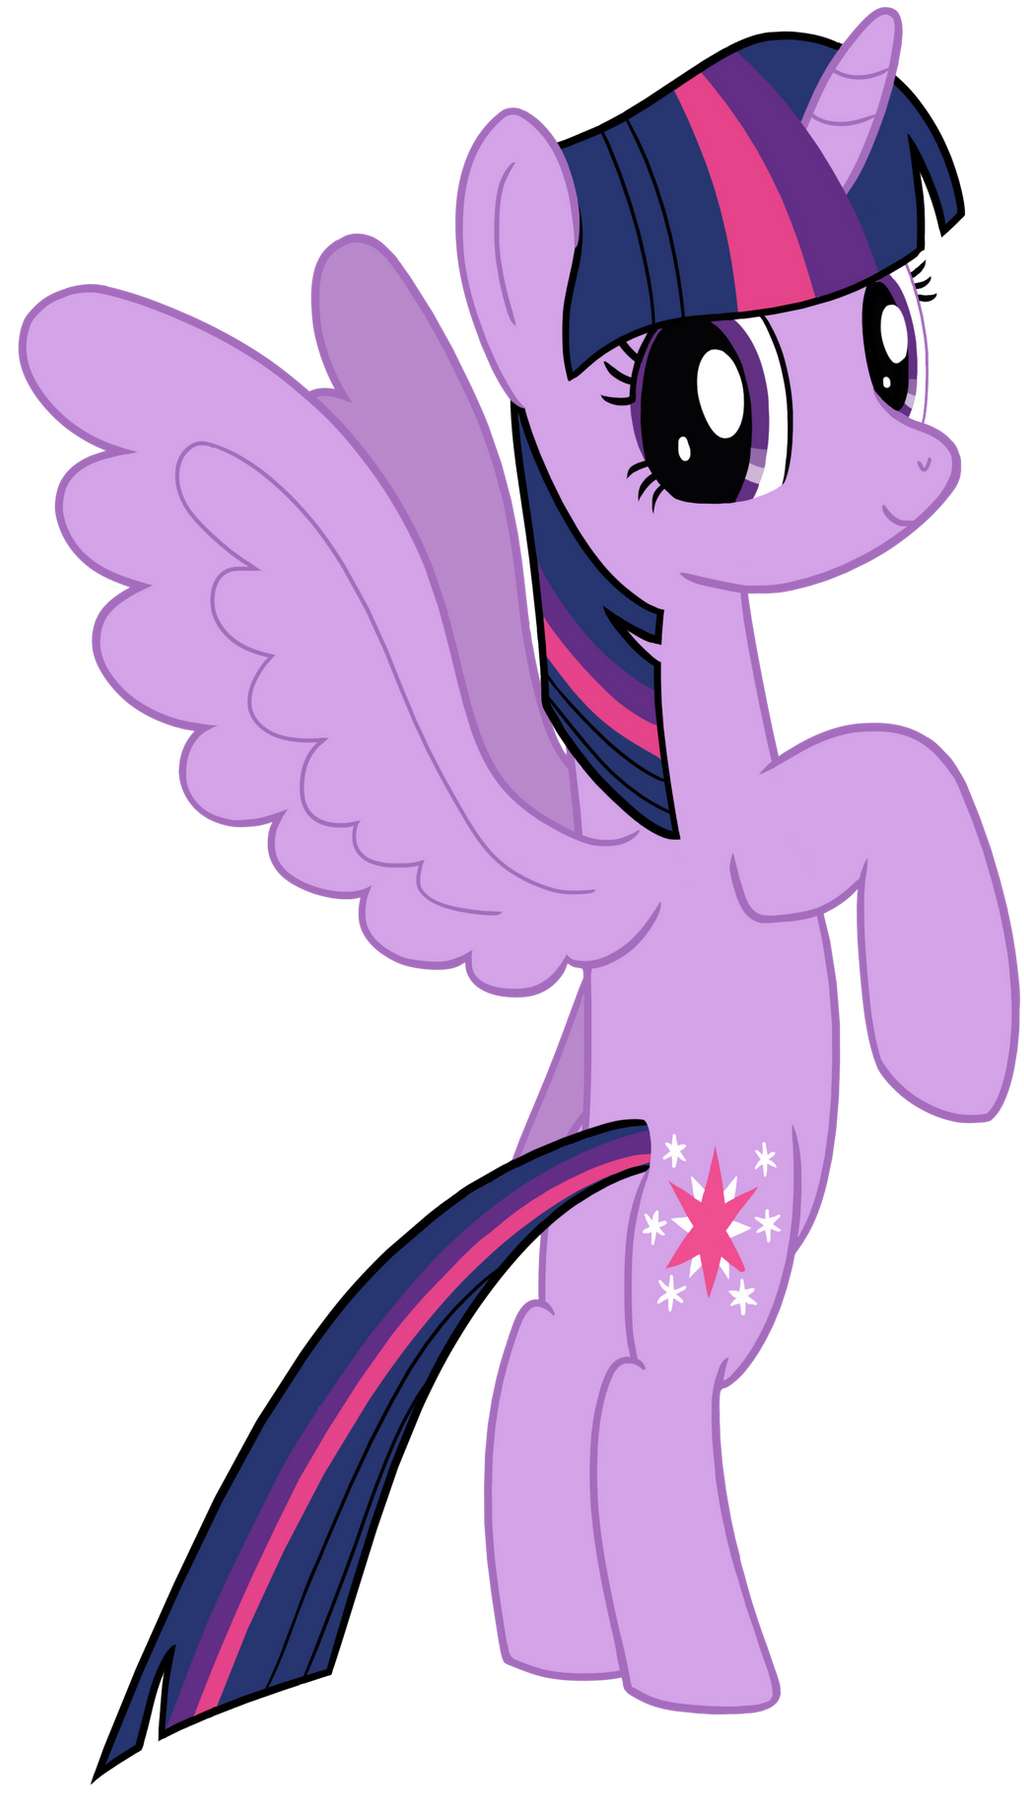 Twilight Sparkle is still the most cutest pony